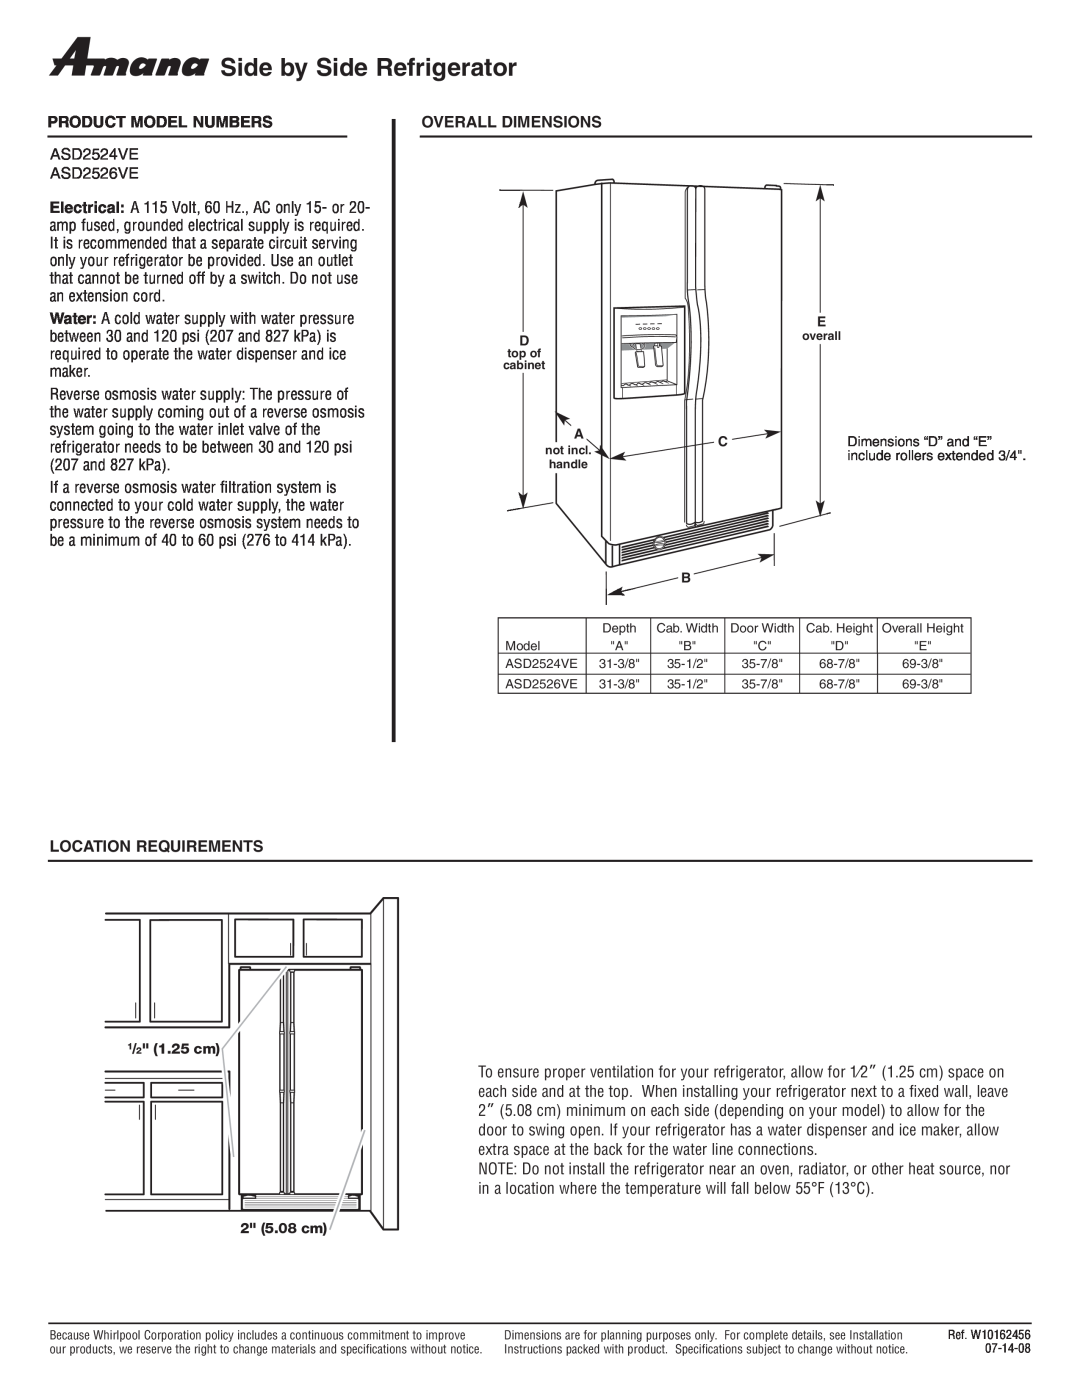 Amana ASD2524VE dimensions Side by Side Refrigerator, Product Model Numbers, Overall Dimensions, Location Requirements 